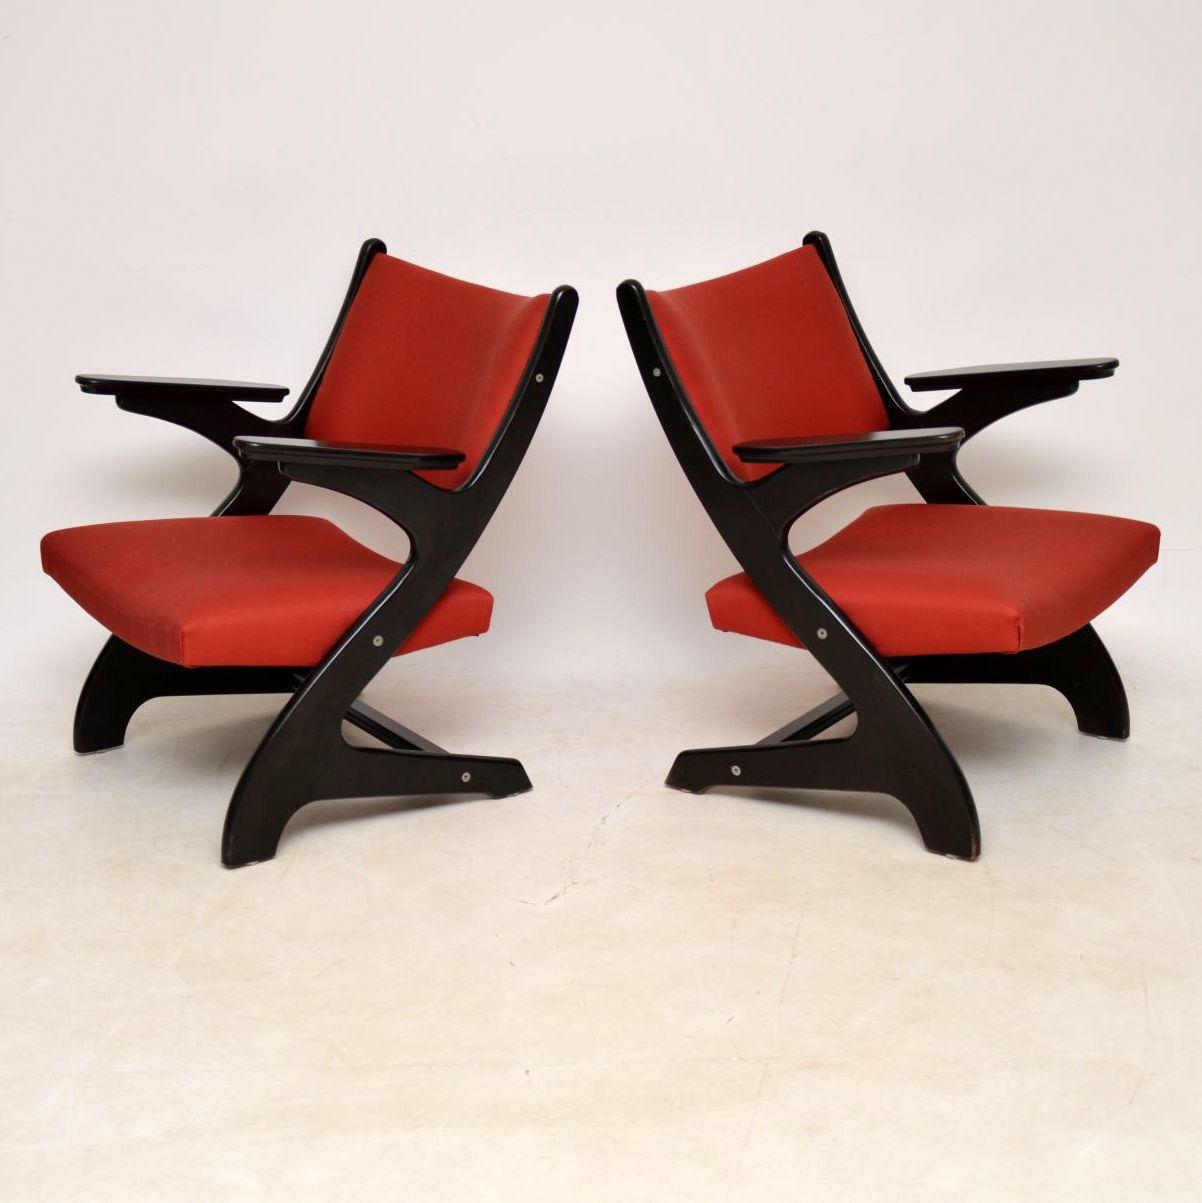 A very stylish and extremely comfortable pair of vintage Italian armchairs, these date from circa 1960s-1970s. They have a stunning shape, with ebonized wood frames, the condition is very good for their age. The frames are all clean, sturdy and